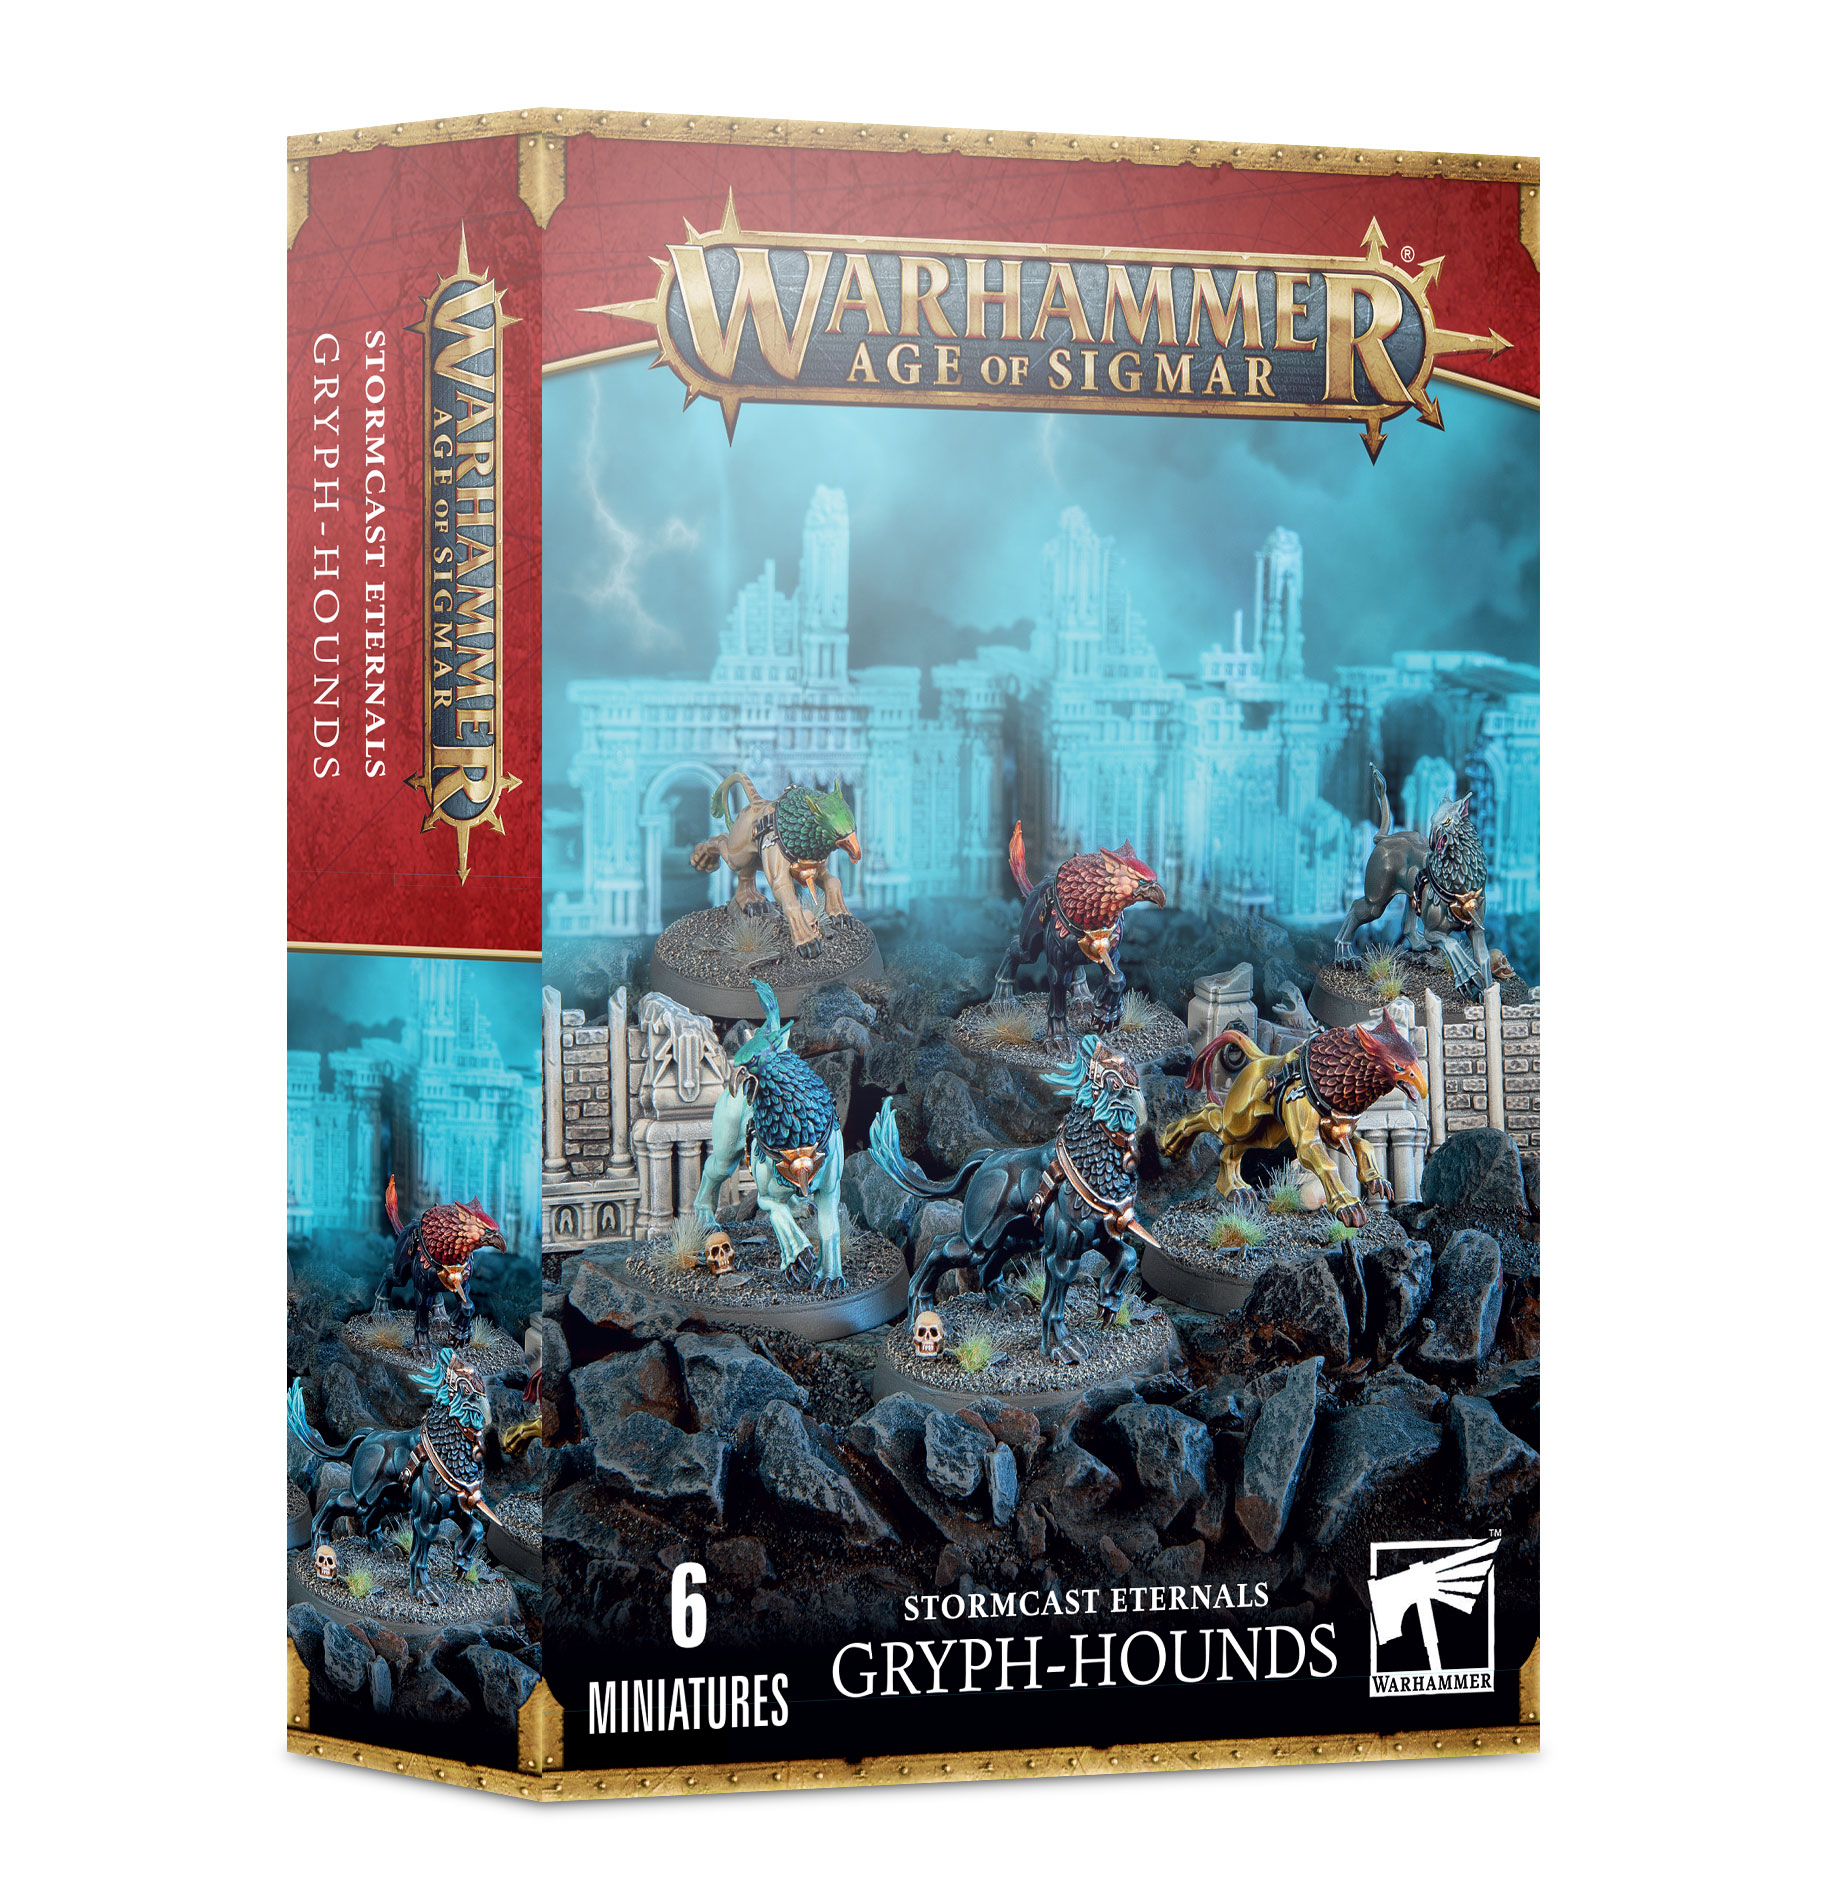 Gryph-Hounds - 96-31 - Stormcast Eternals - Warhammer Age of Sigmar